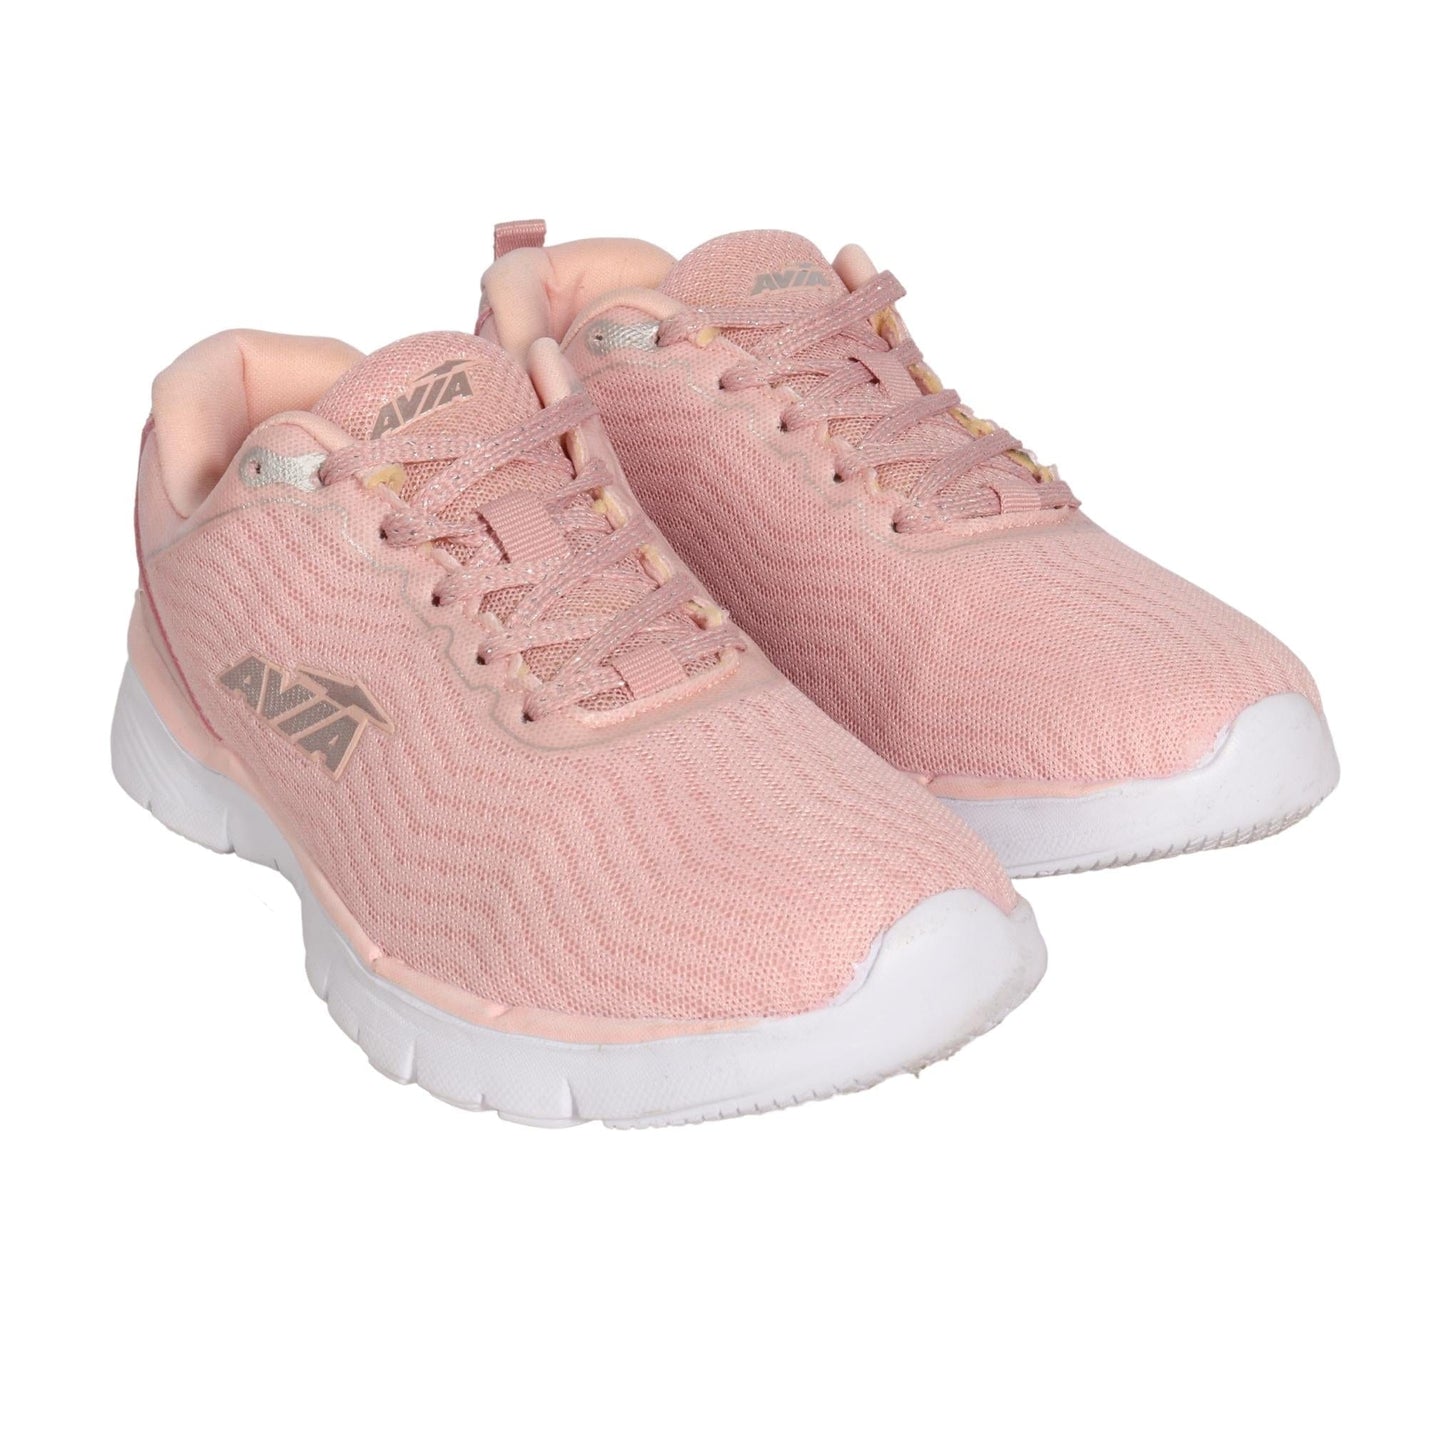 AVIA Athletic Shoes AVIA - Casual Athletic Shoes